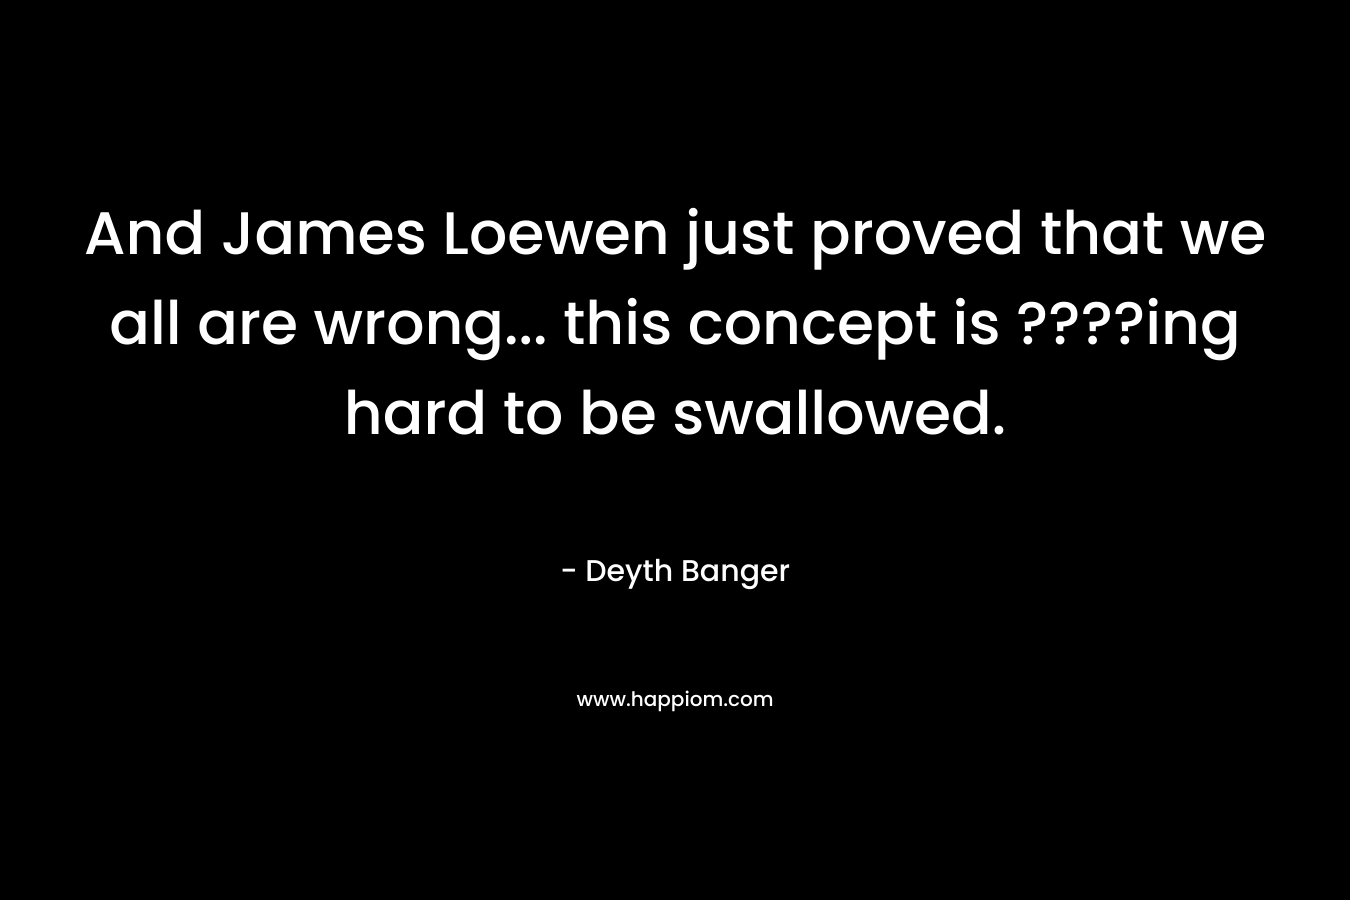 And James Loewen just proved that we all are wrong... this concept is ????ing hard to be swallowed.